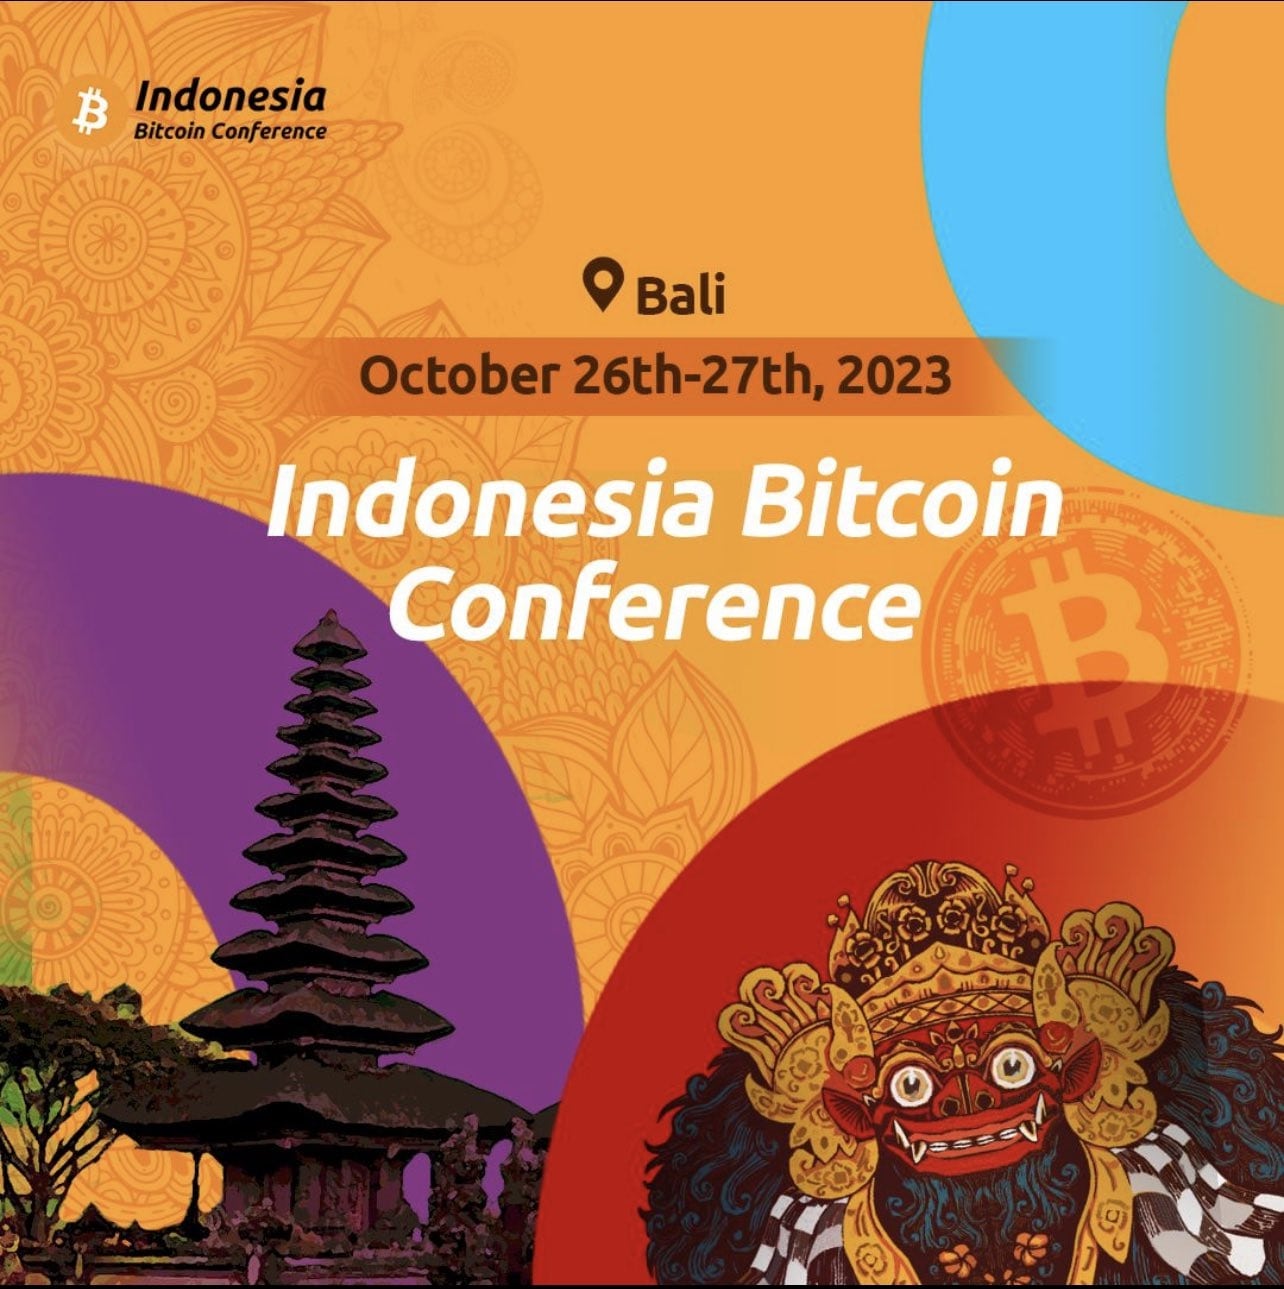 Indonesia Bitcoin Conference 2023 - Oct 26/27 2023, Bali - Ticket sale open